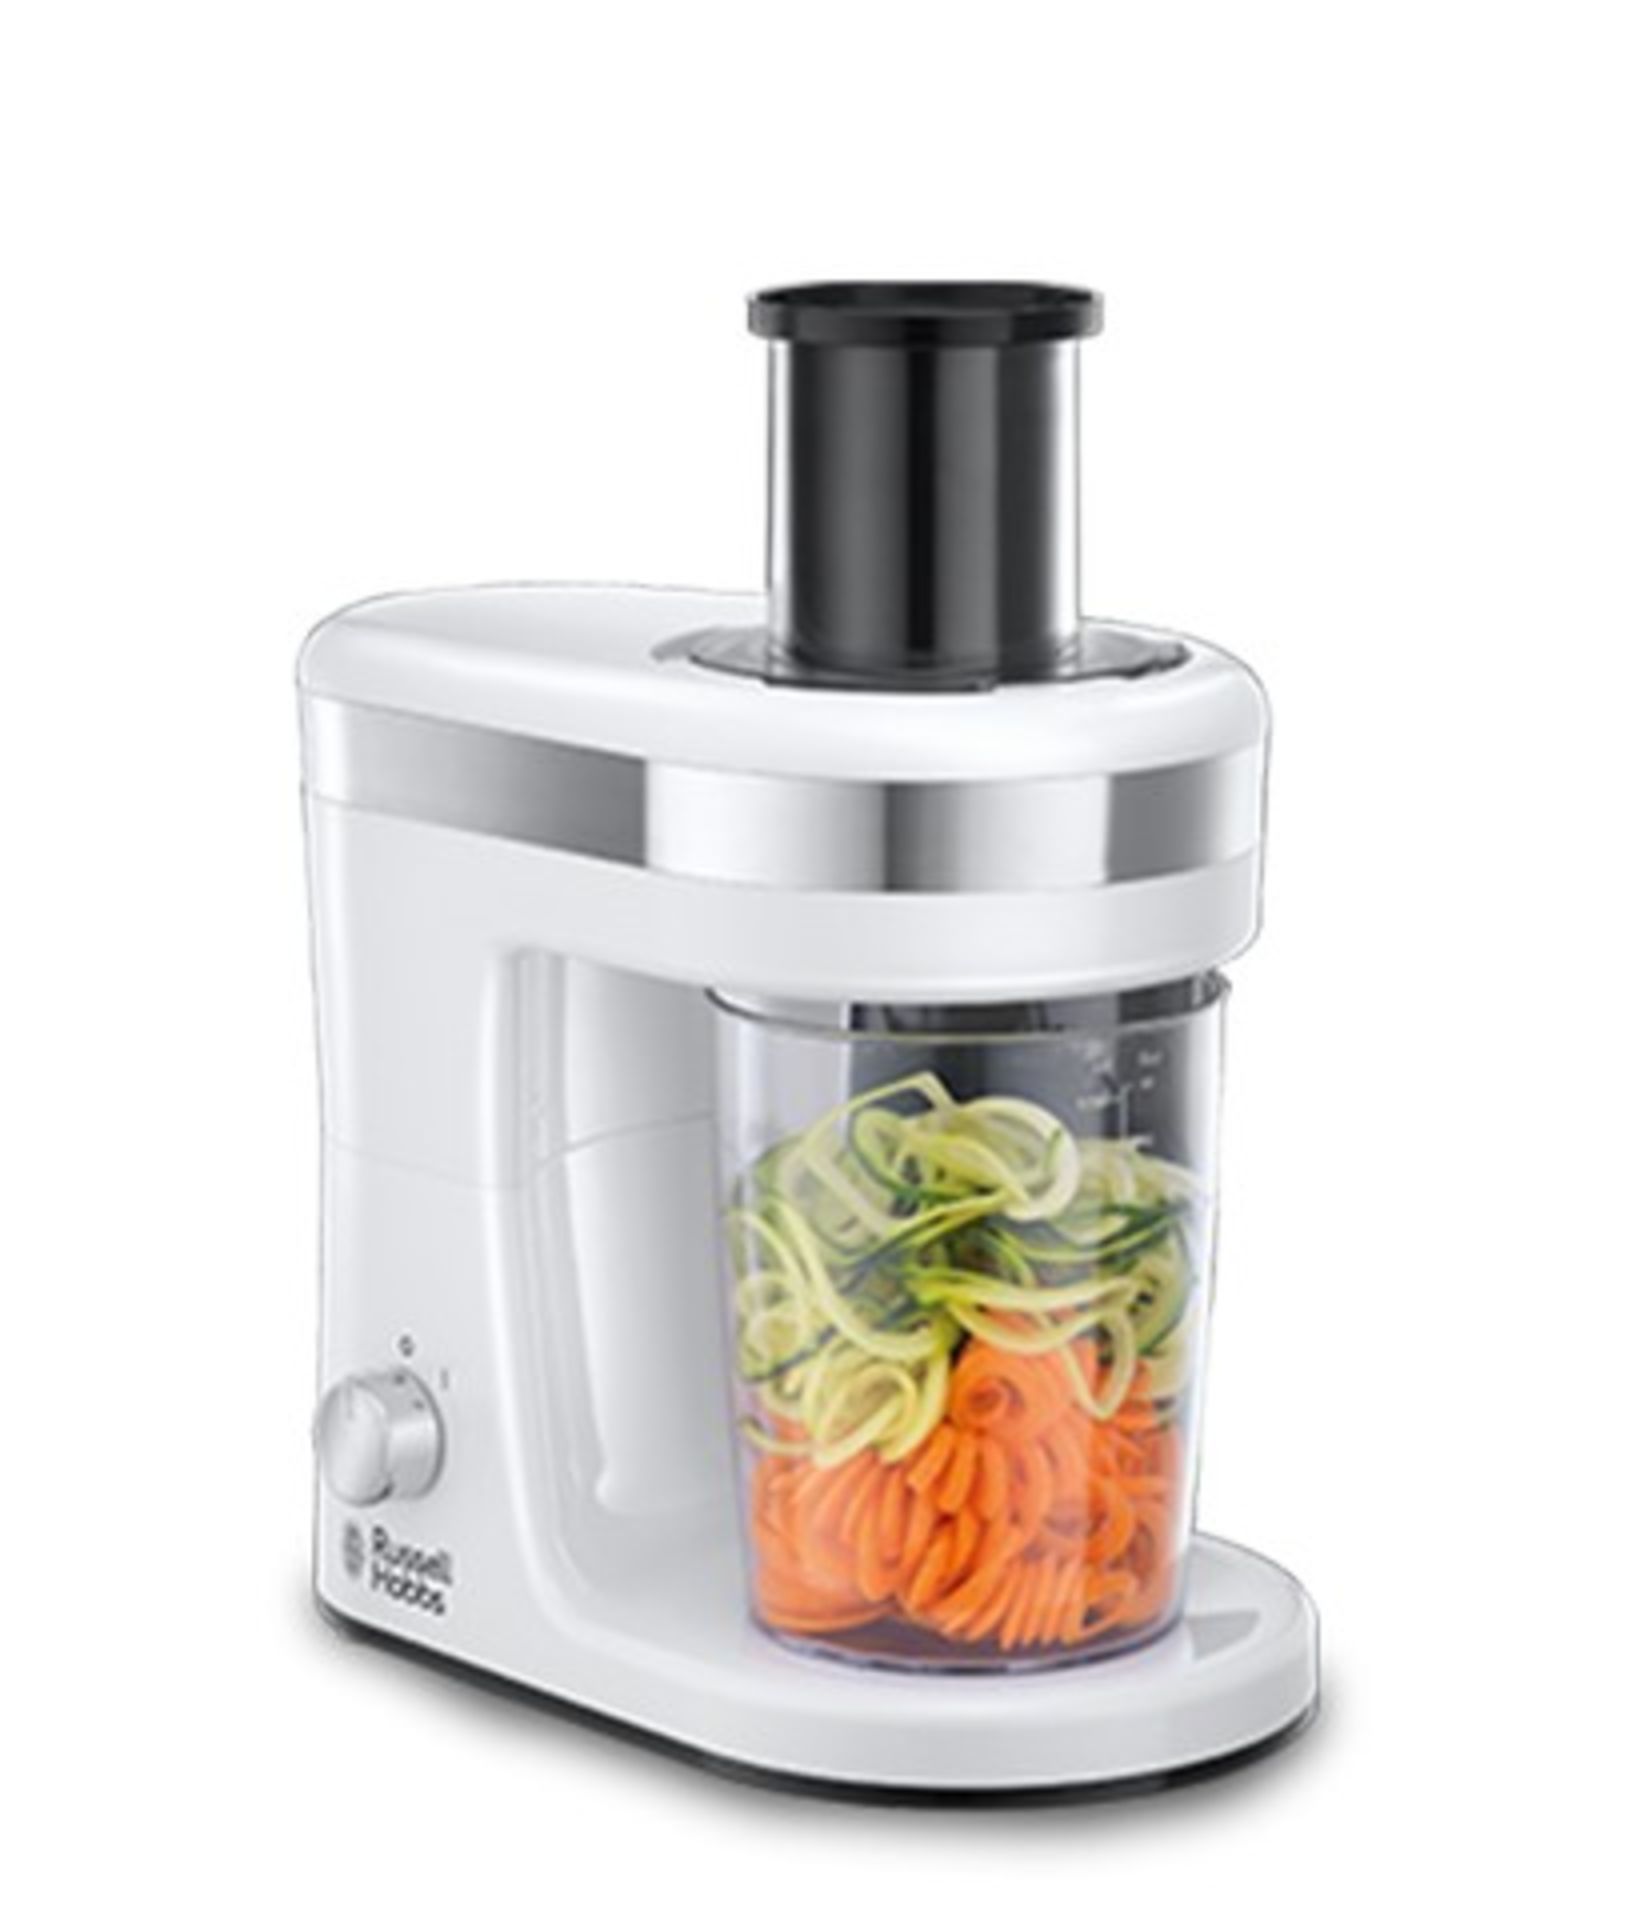 V Brand New Russell Hobbs 300W Ultimate Spiralizer - Cuts into small noodles - large noodles - - Image 2 of 2